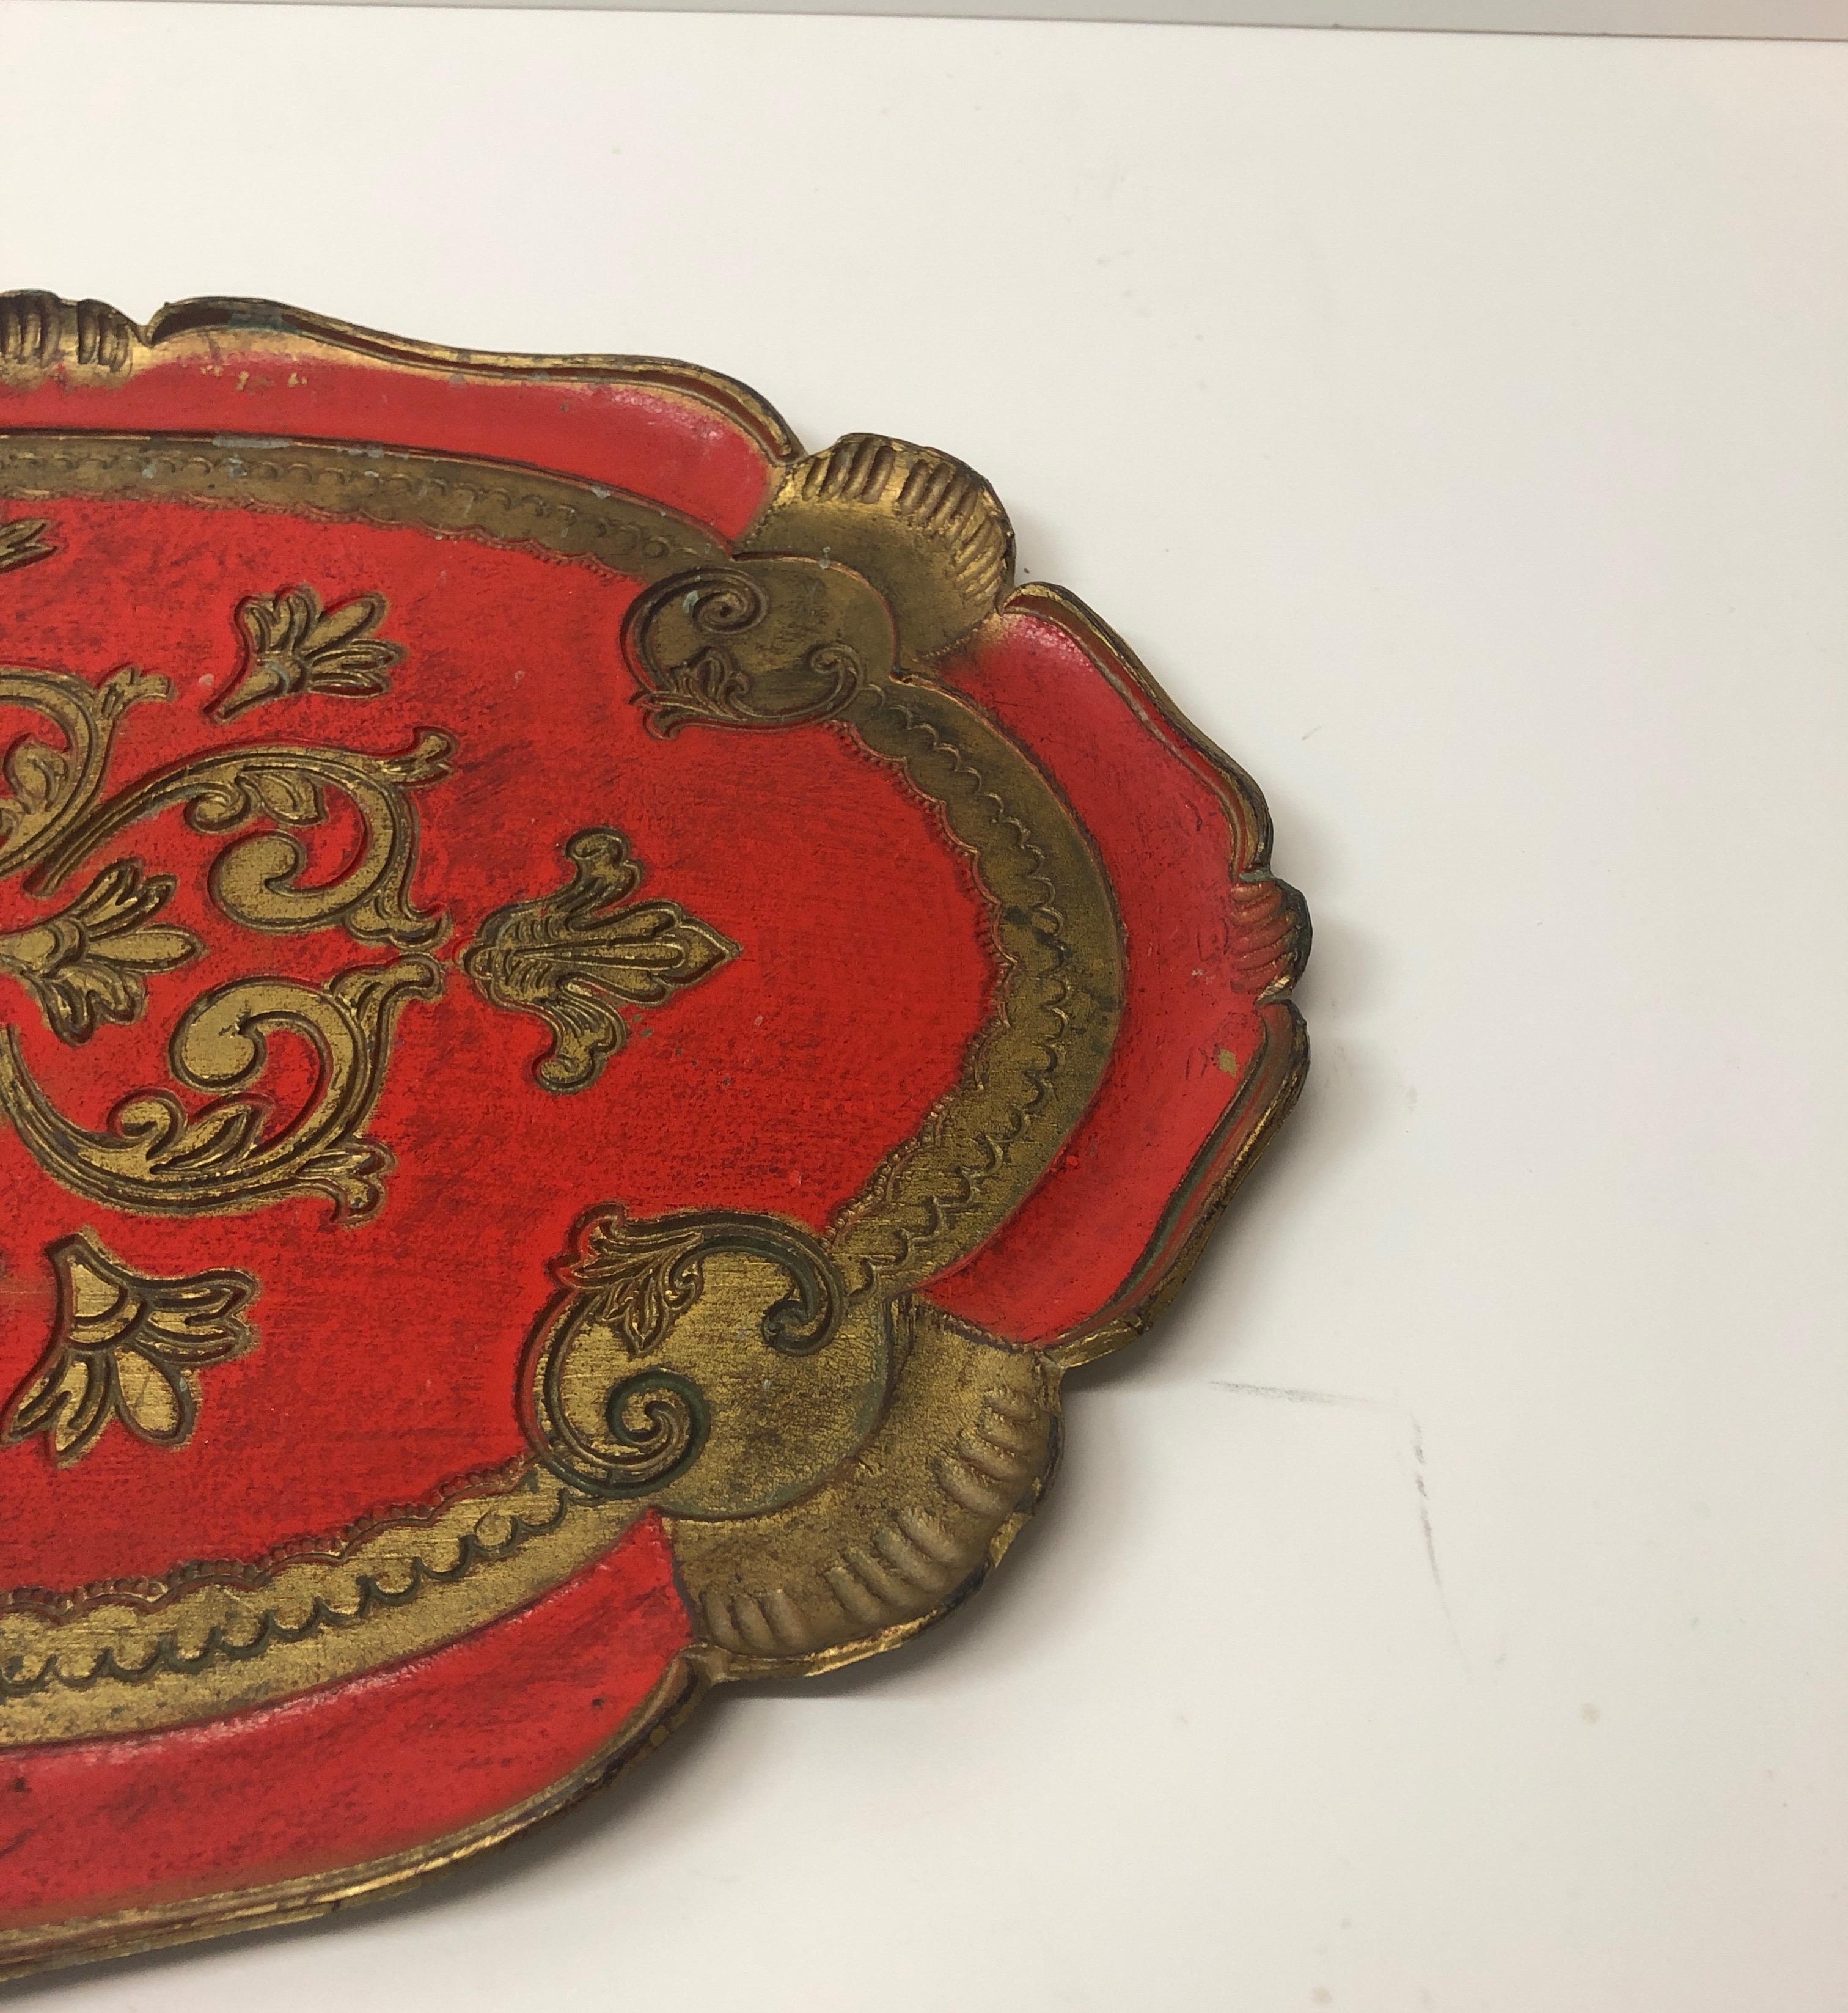 Large red and gold Florentine serving tray.
Stamped made in Italy.
Size: 17.5” L x 11.5” D x 1/2” H.